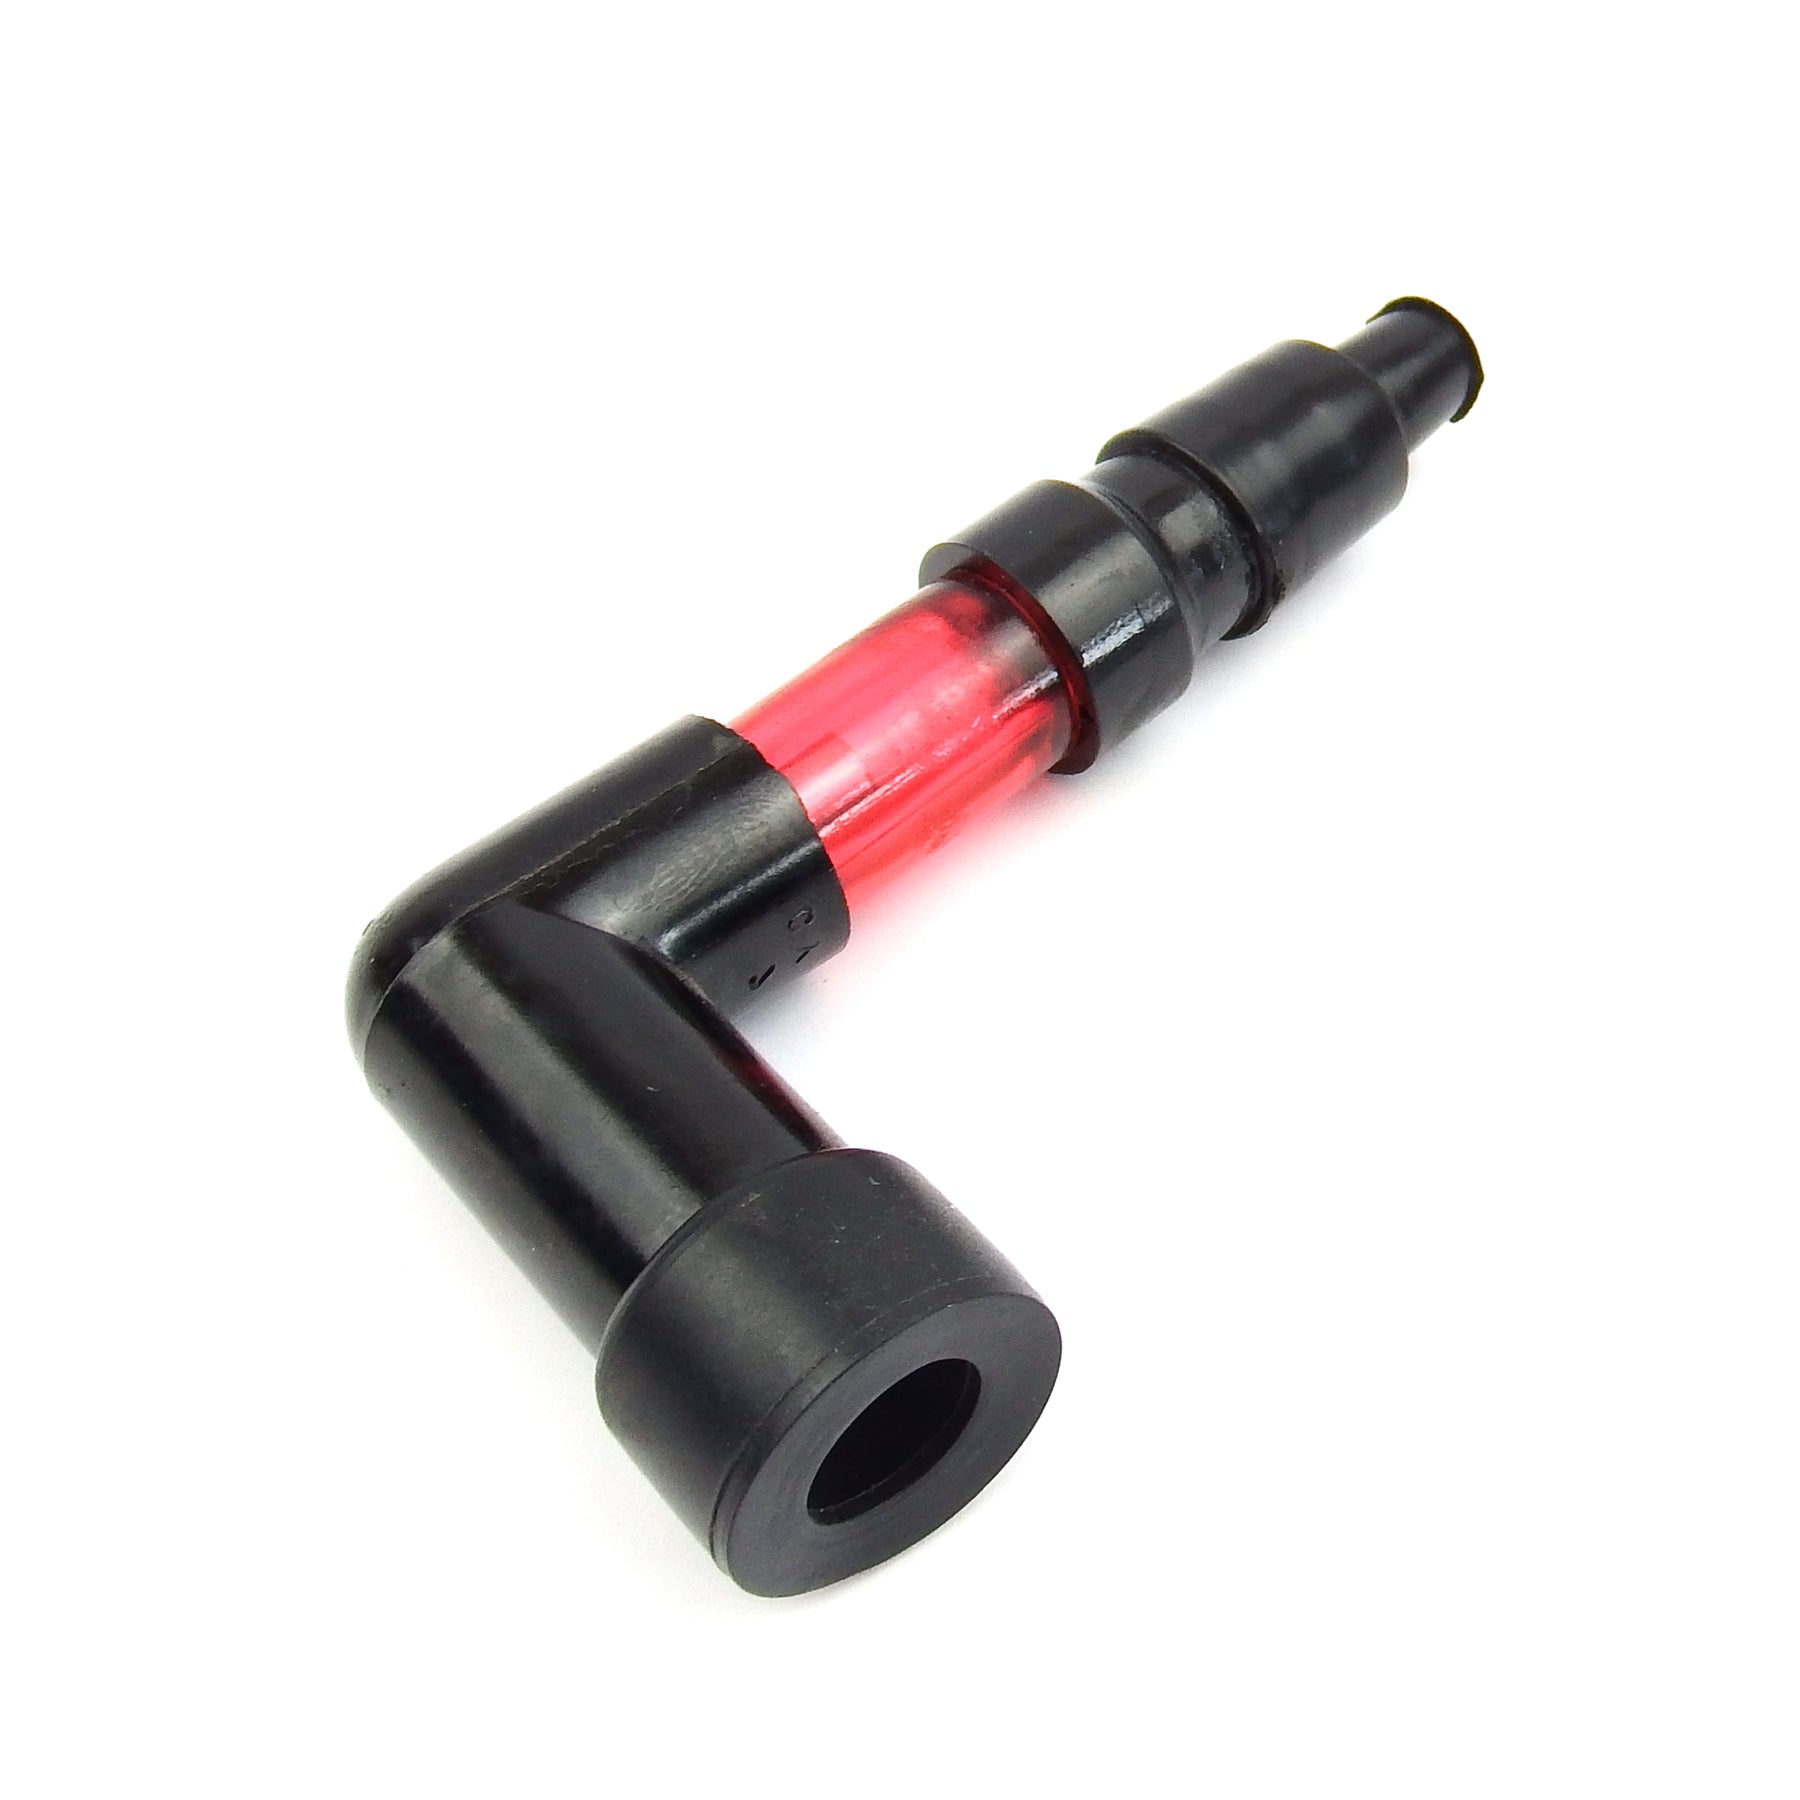 Spark Plug Resistor Cap which Lights Up Neon Red